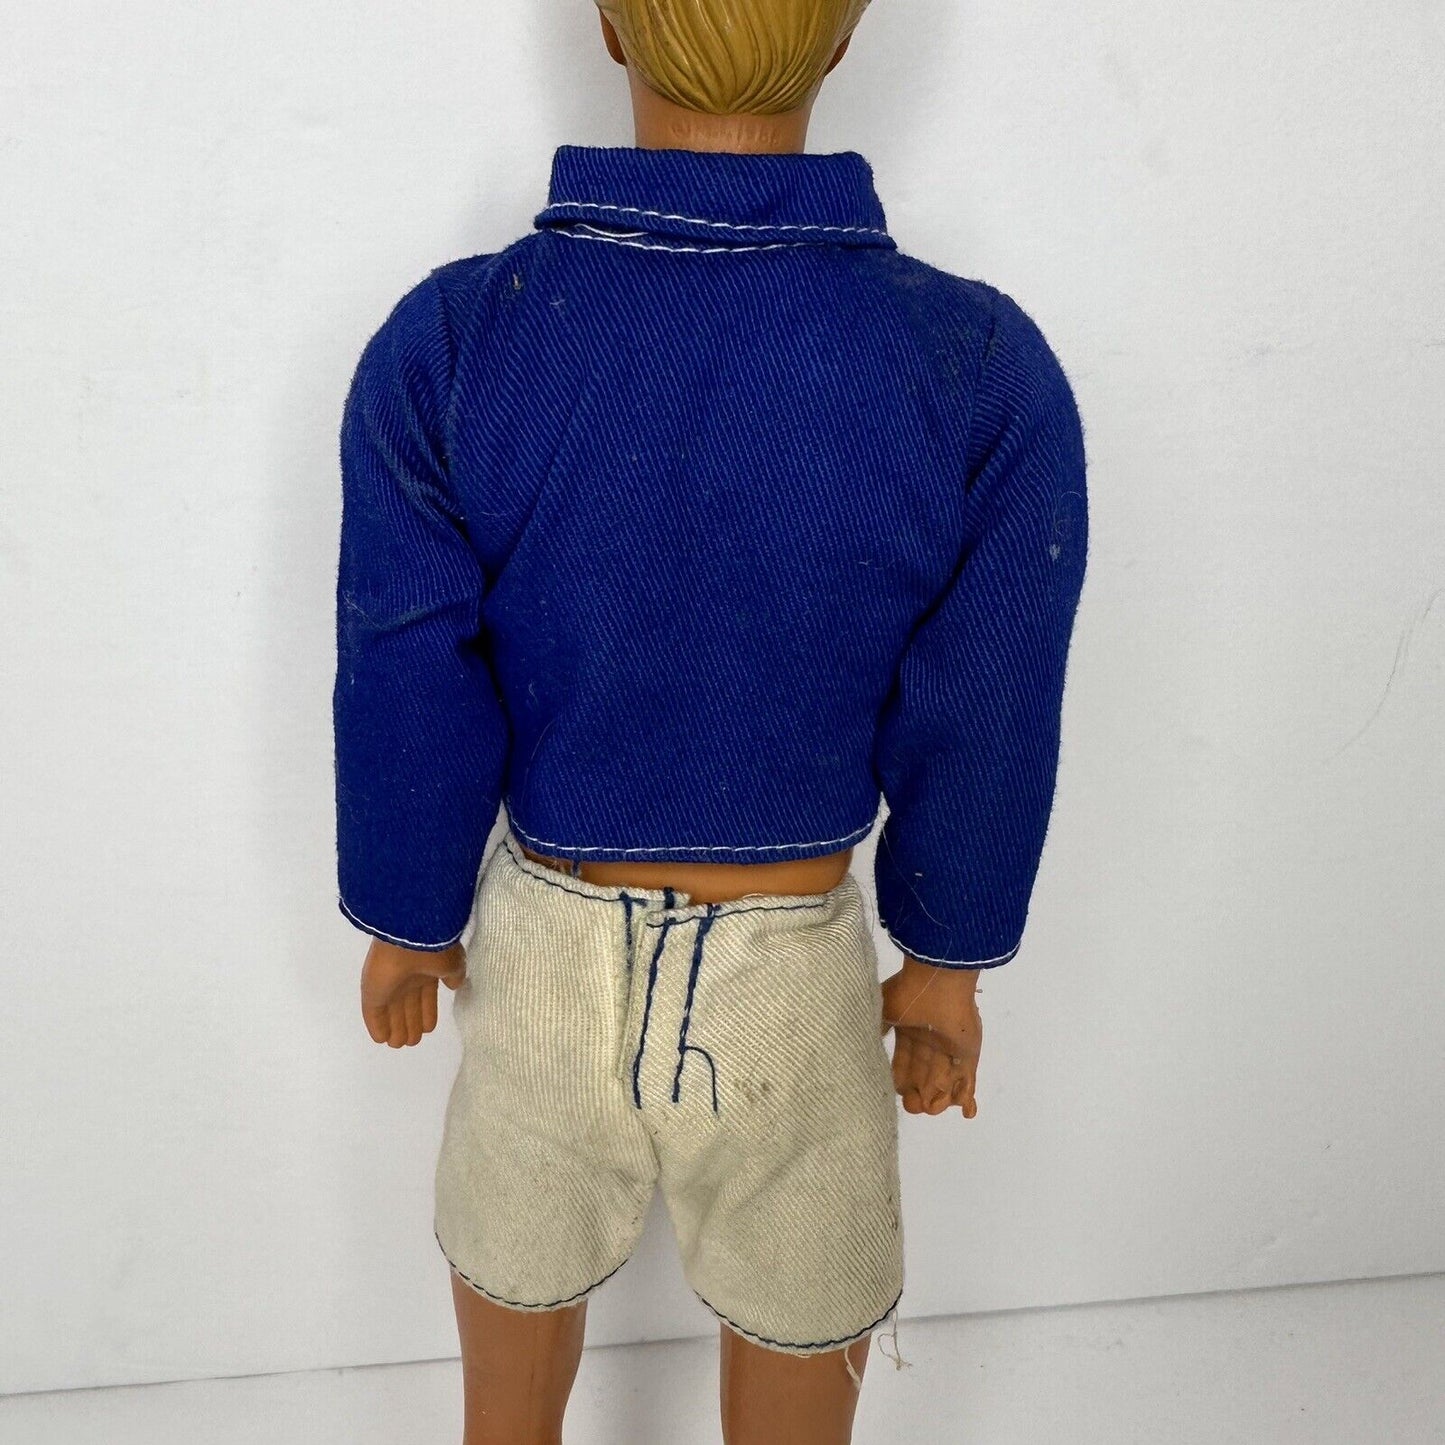 Vintage 1968 Malibu Ken Doll - 12" Collectible Toy with Molded Blonde Hair - TreasuTiques